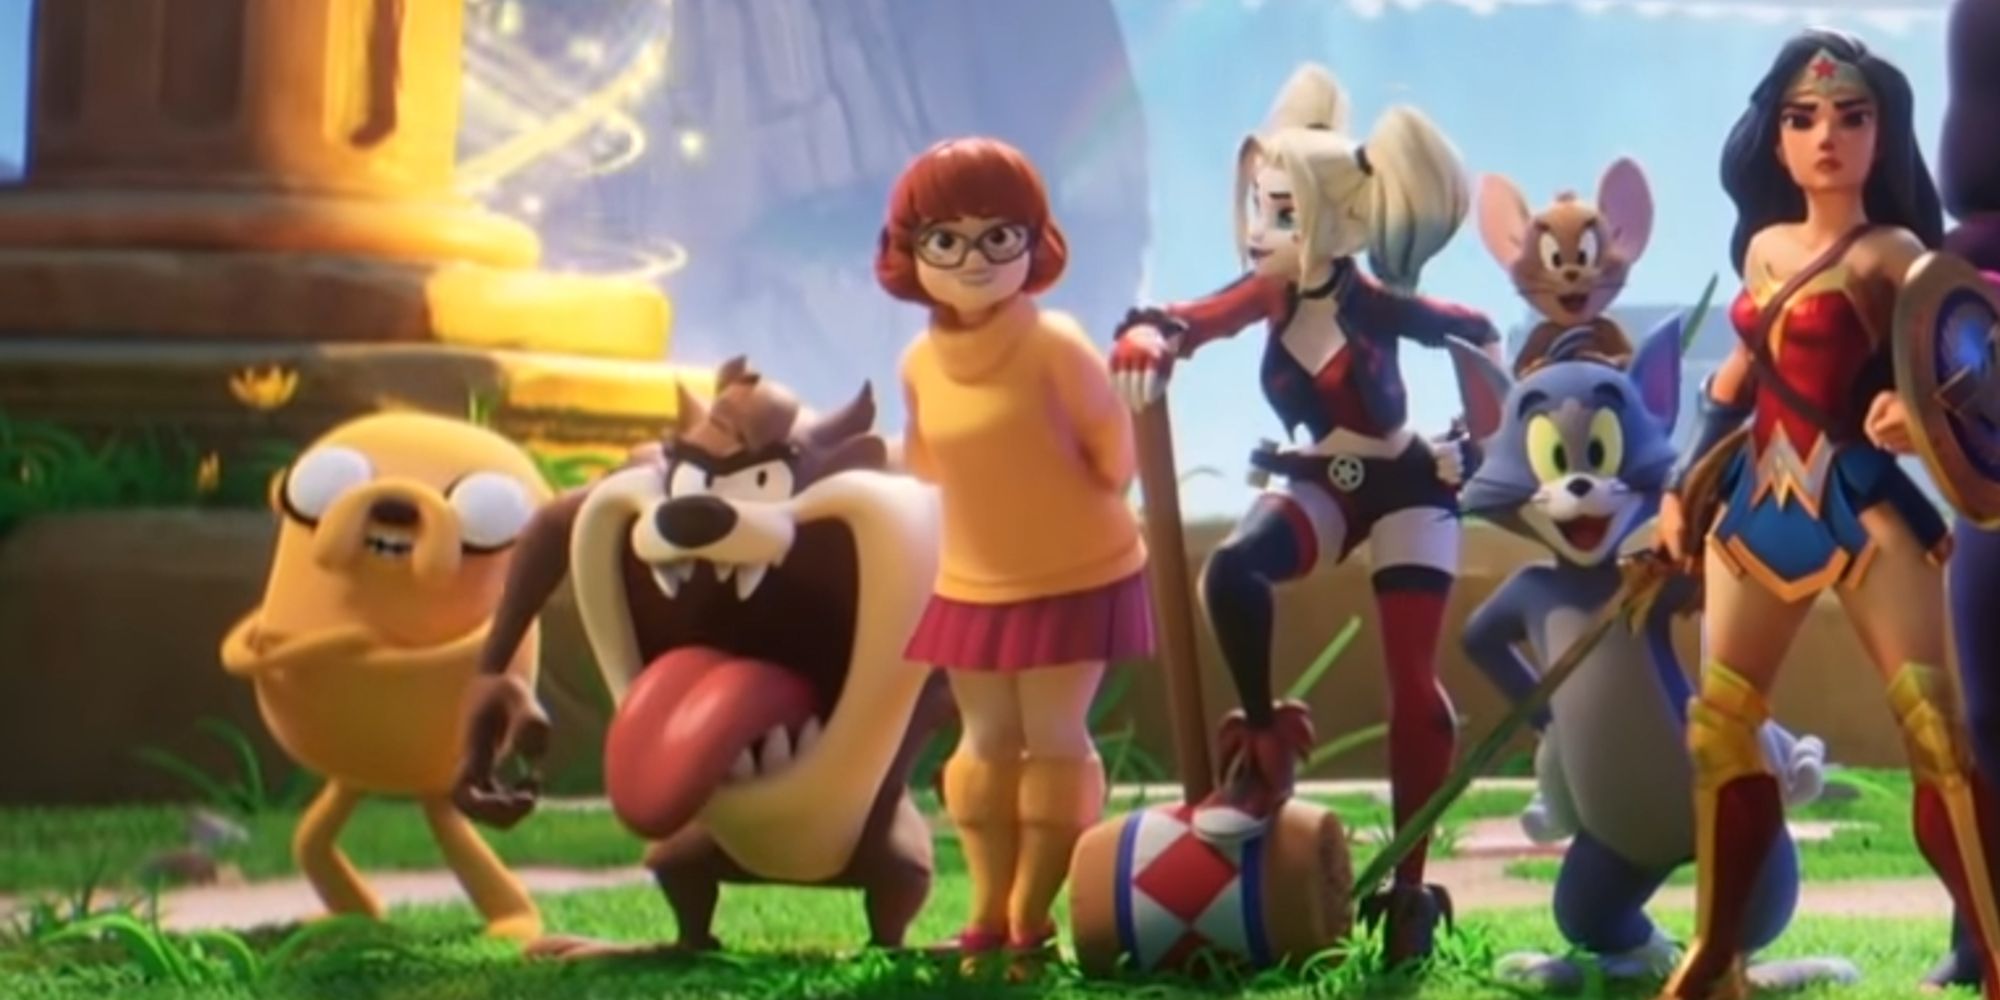 Velma Dinkley in the group shot of the roster in MultiVersus 1